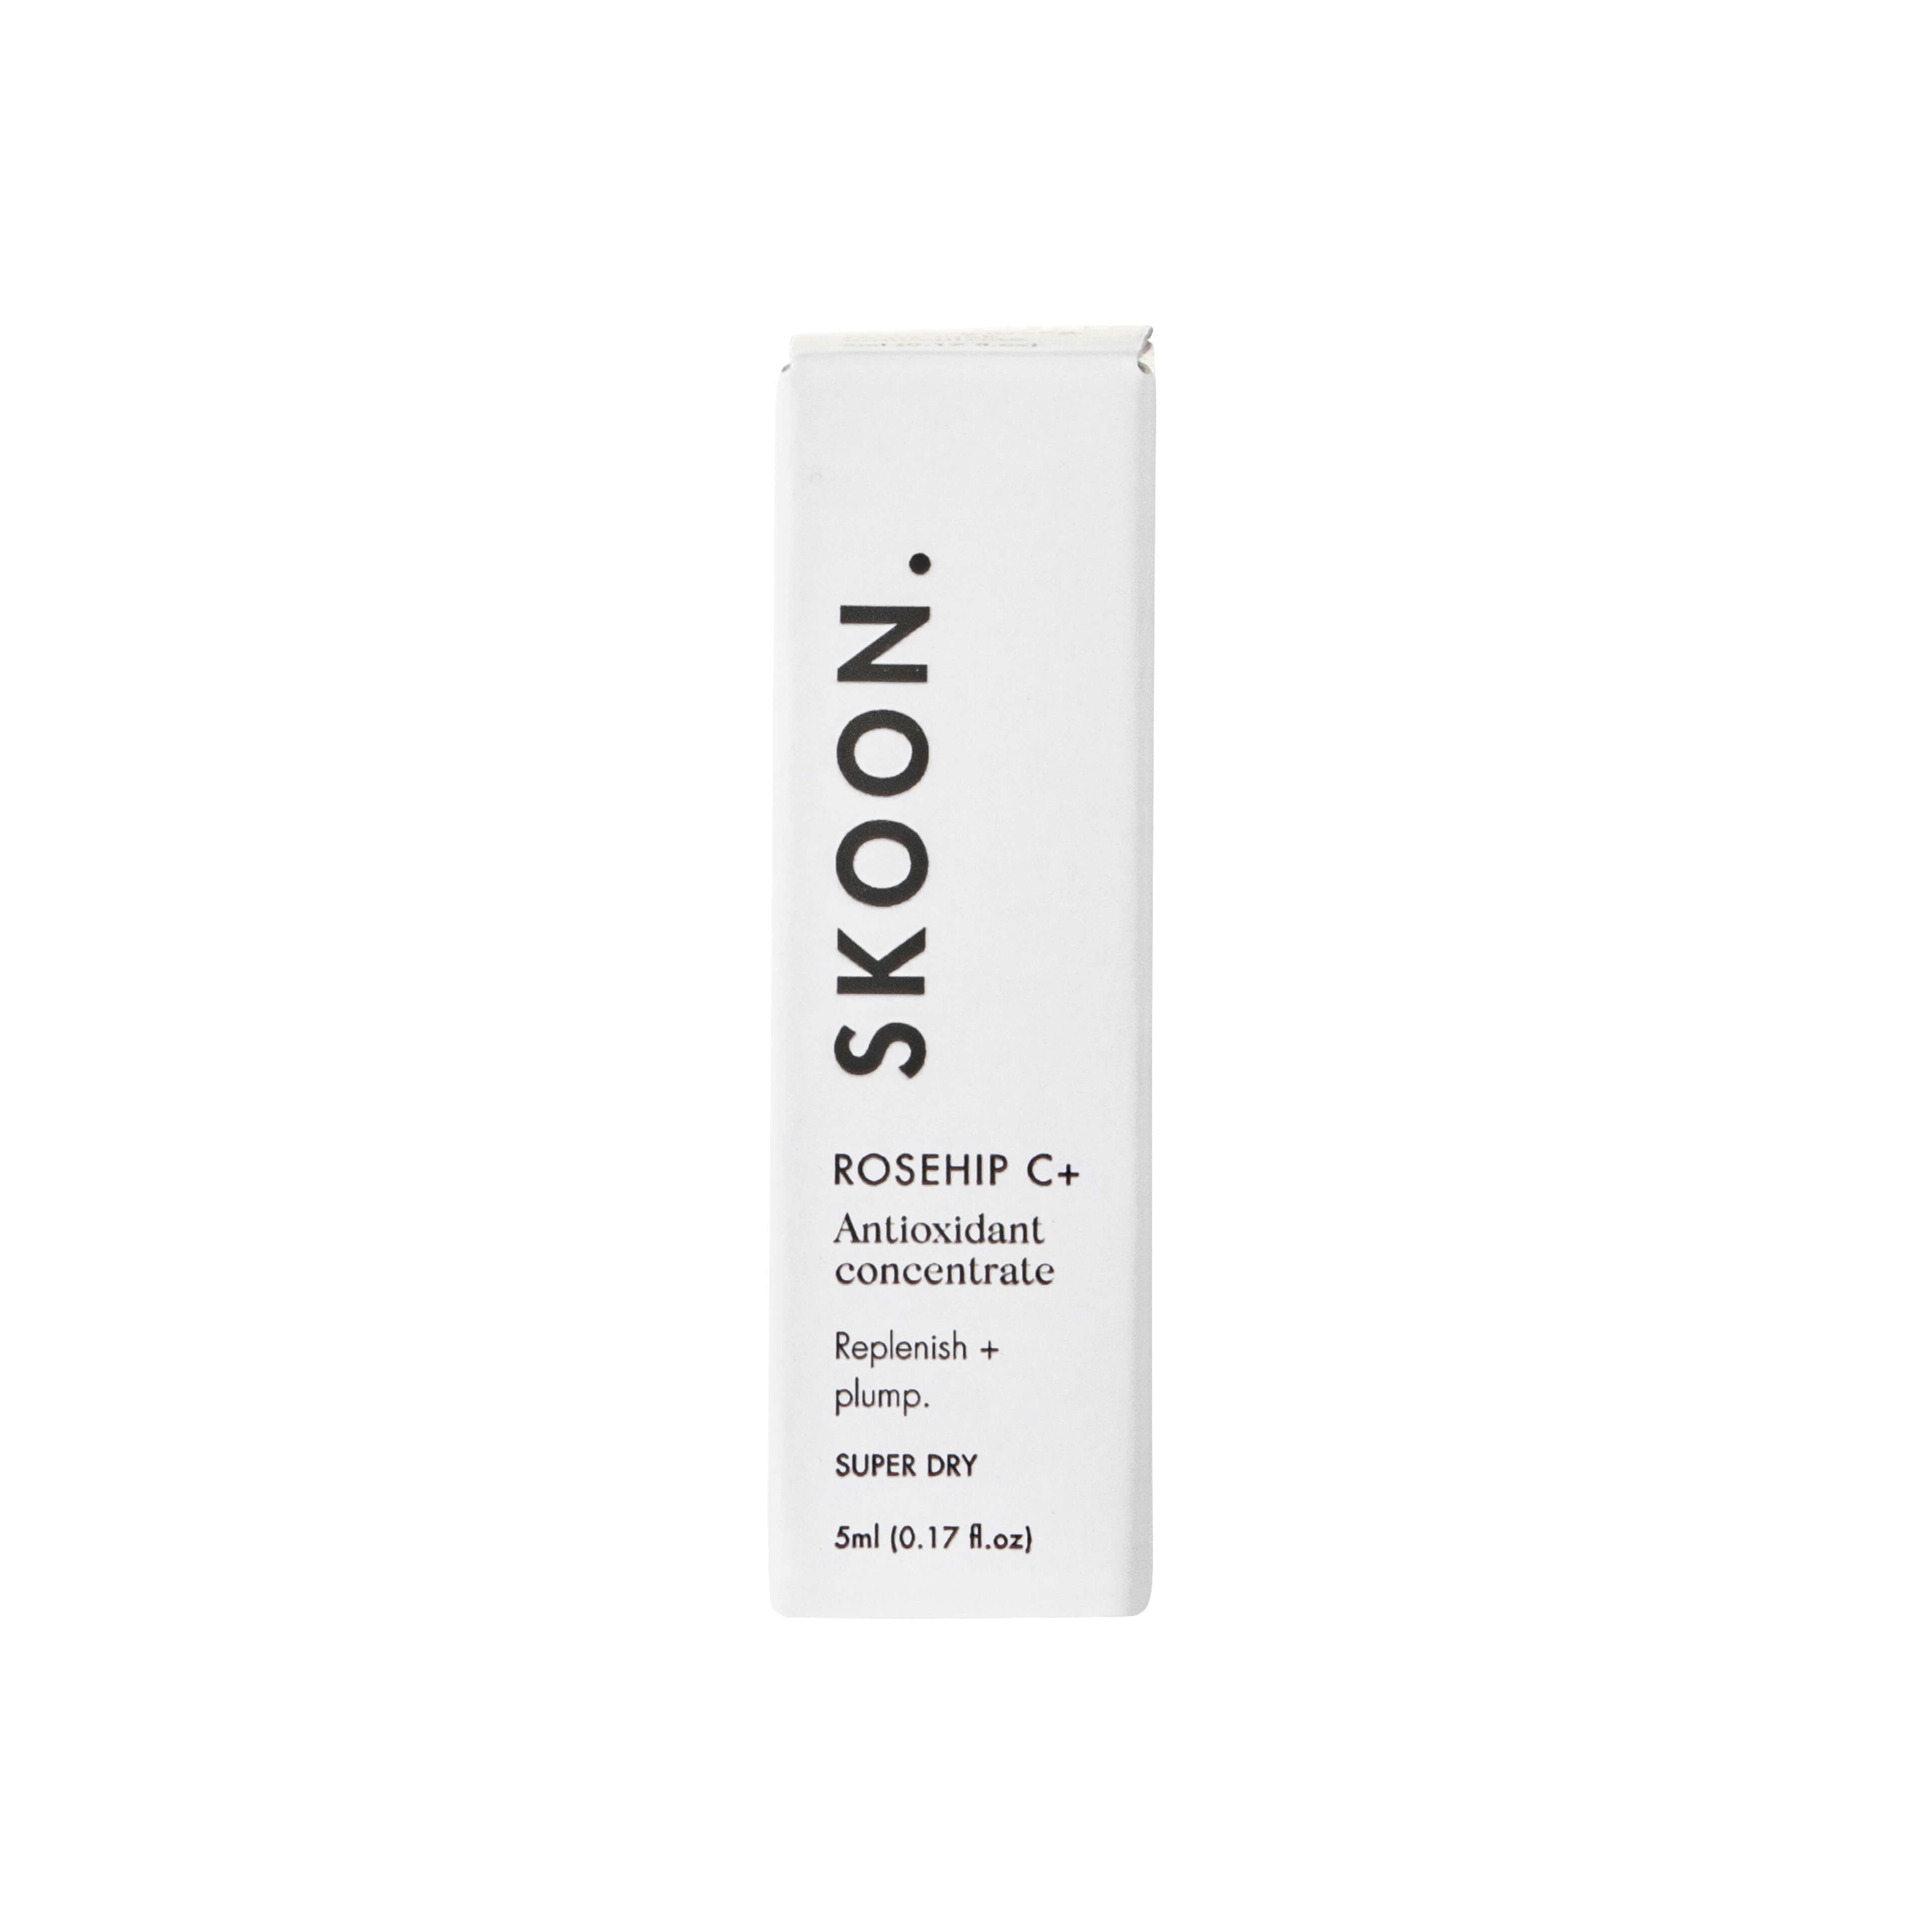 SKOON. ROSEHIP C+ Antioxidant concentrate